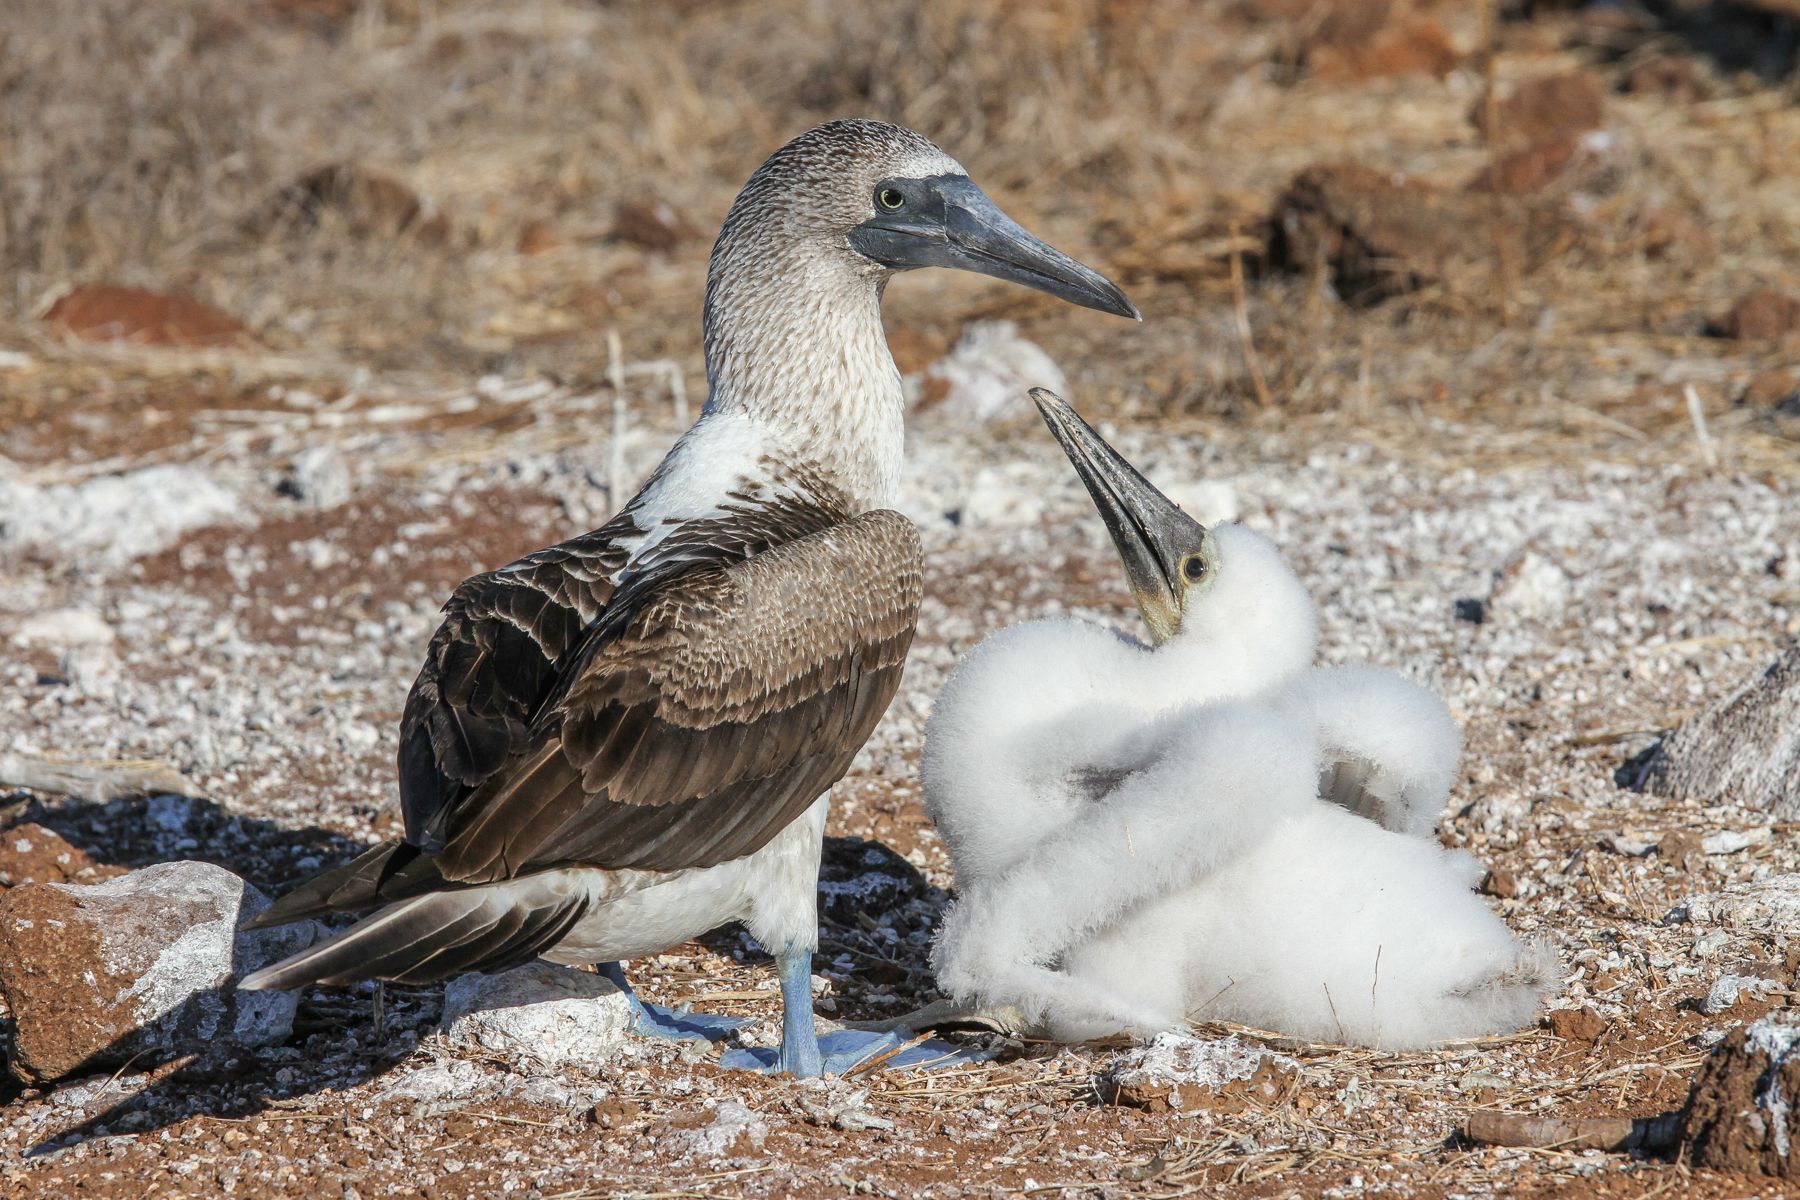 One of the most charismatic Galapagos seabirds is the Blue-footed Booby